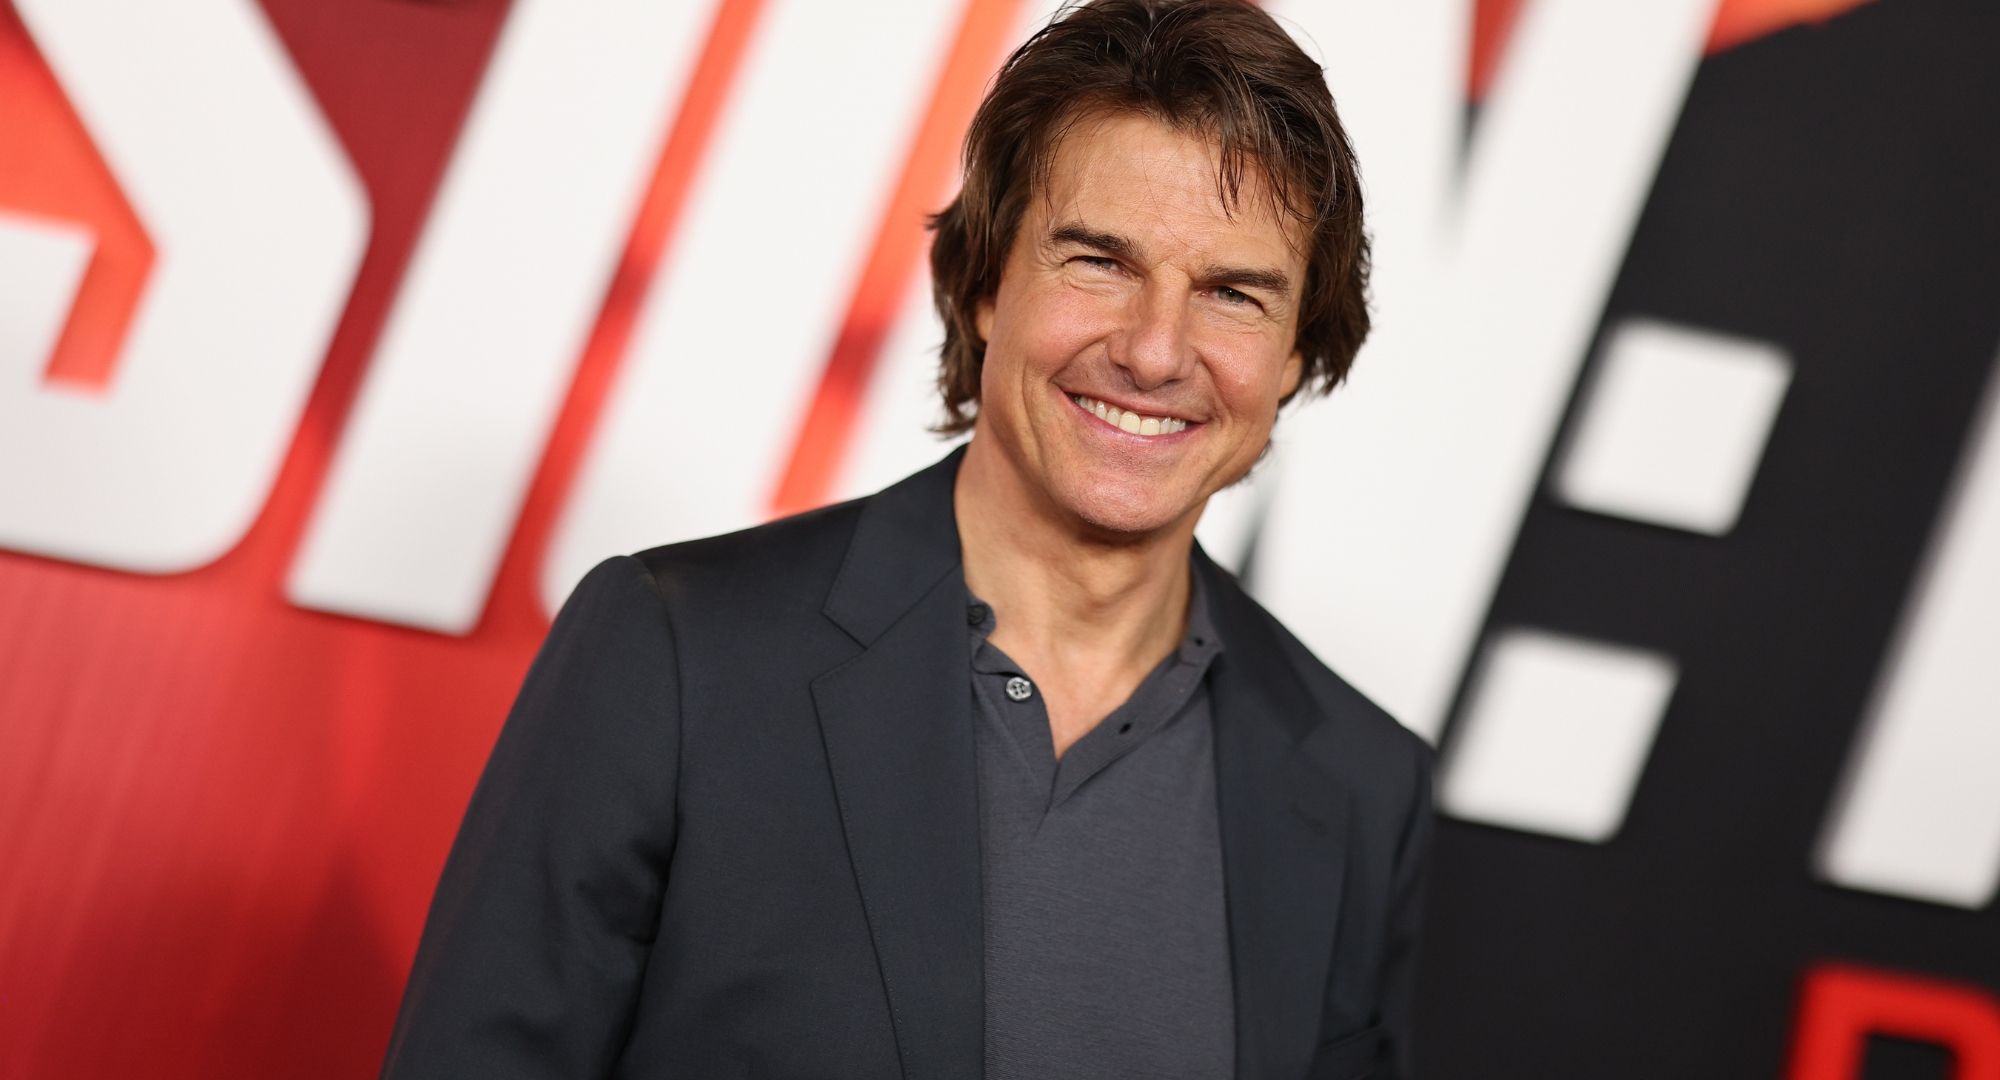 A Deep-Dive into Tom Cruise’s Relationship Timeline